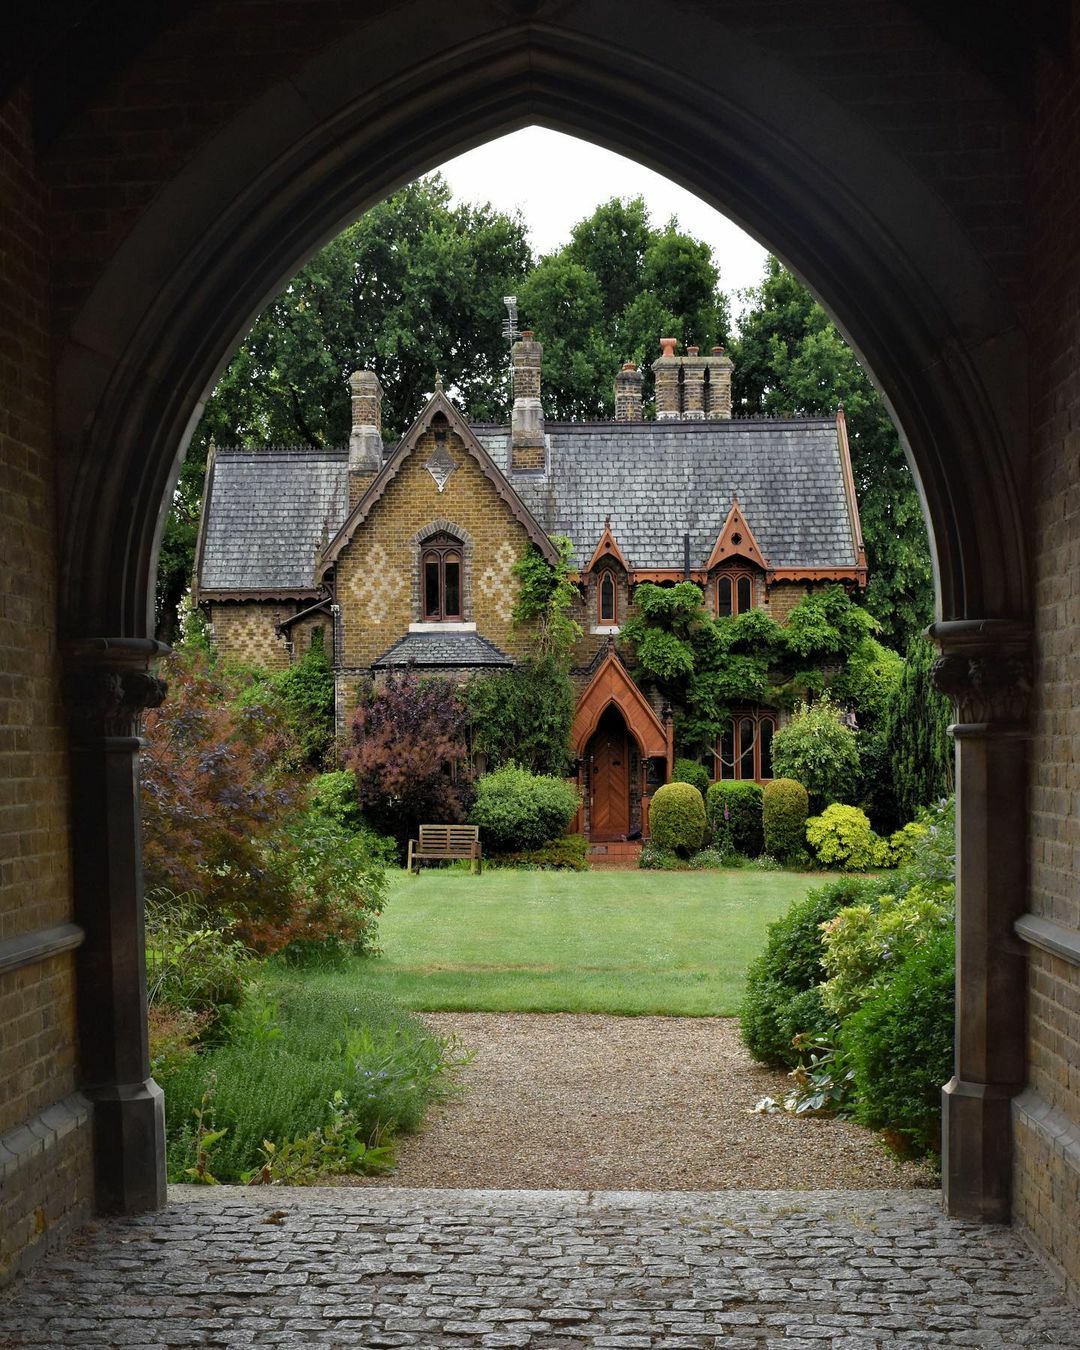 19th Century Victorian Gothic Cottage Framed By The Arch Of The Gatehouse At Holly Village, Highgate, North London, UK